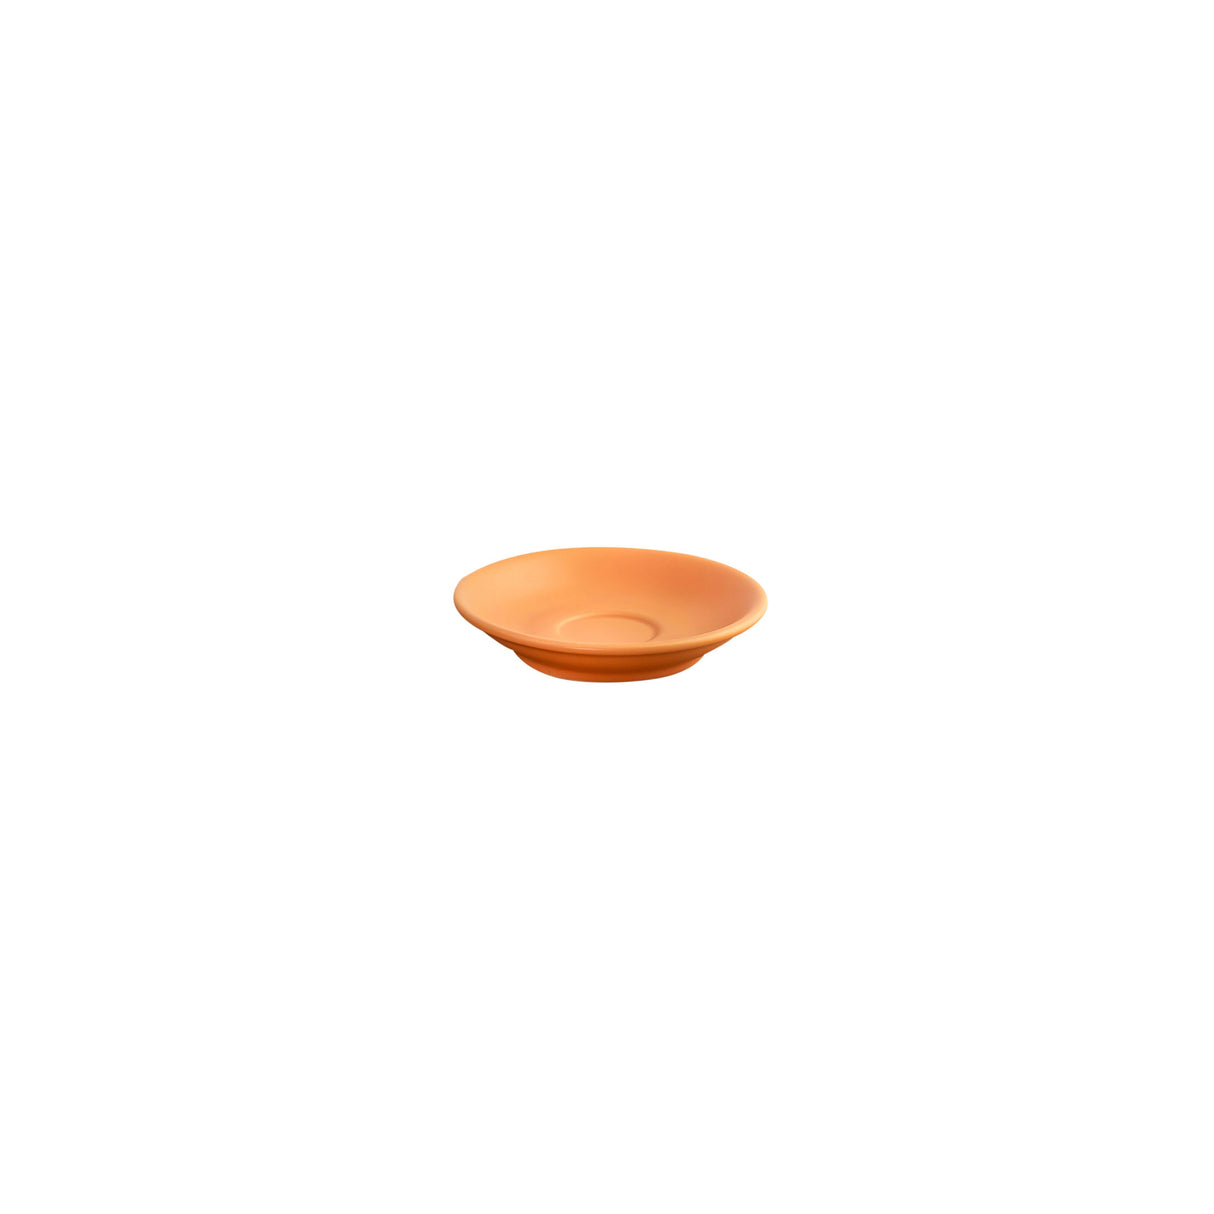 Saucer - Apricot, 120mm: Pack of 6